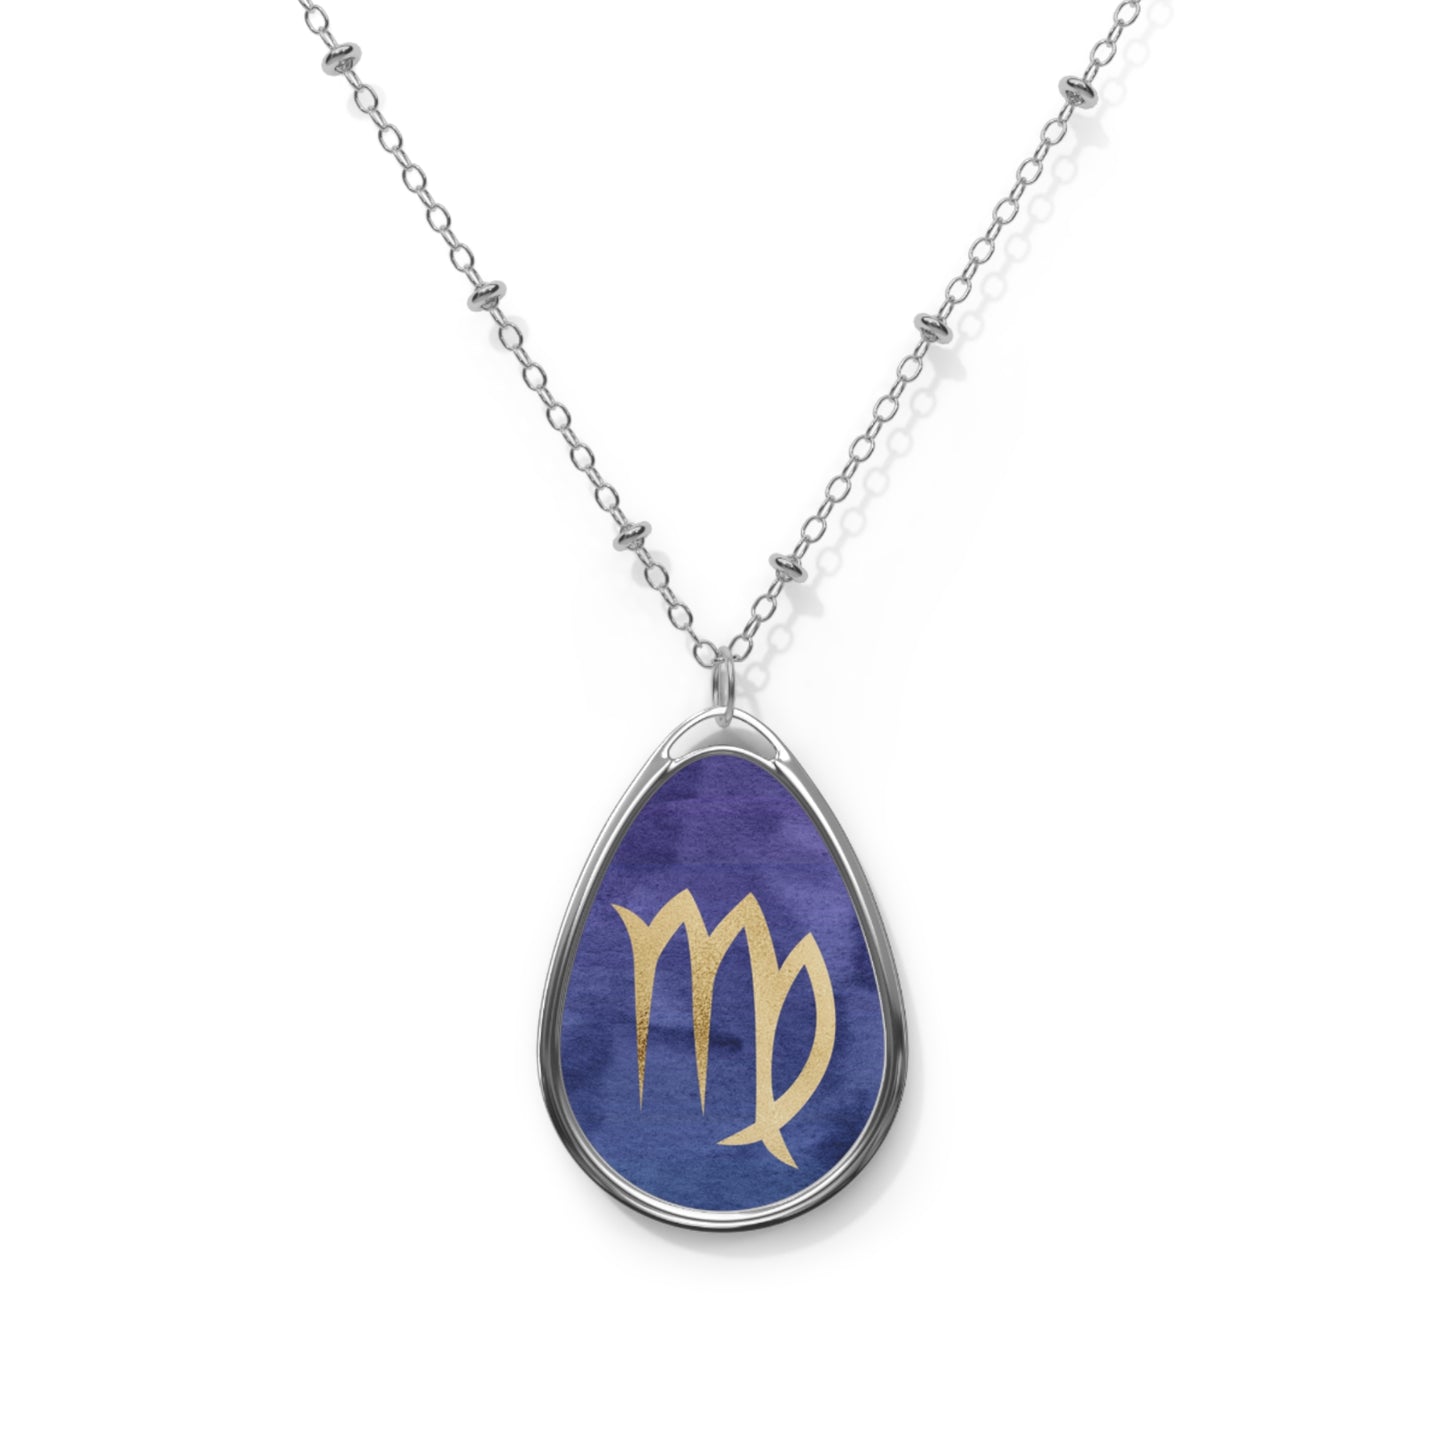 Virgo Zodiac Sign ~ Necklace & Oval Pendant With Chain